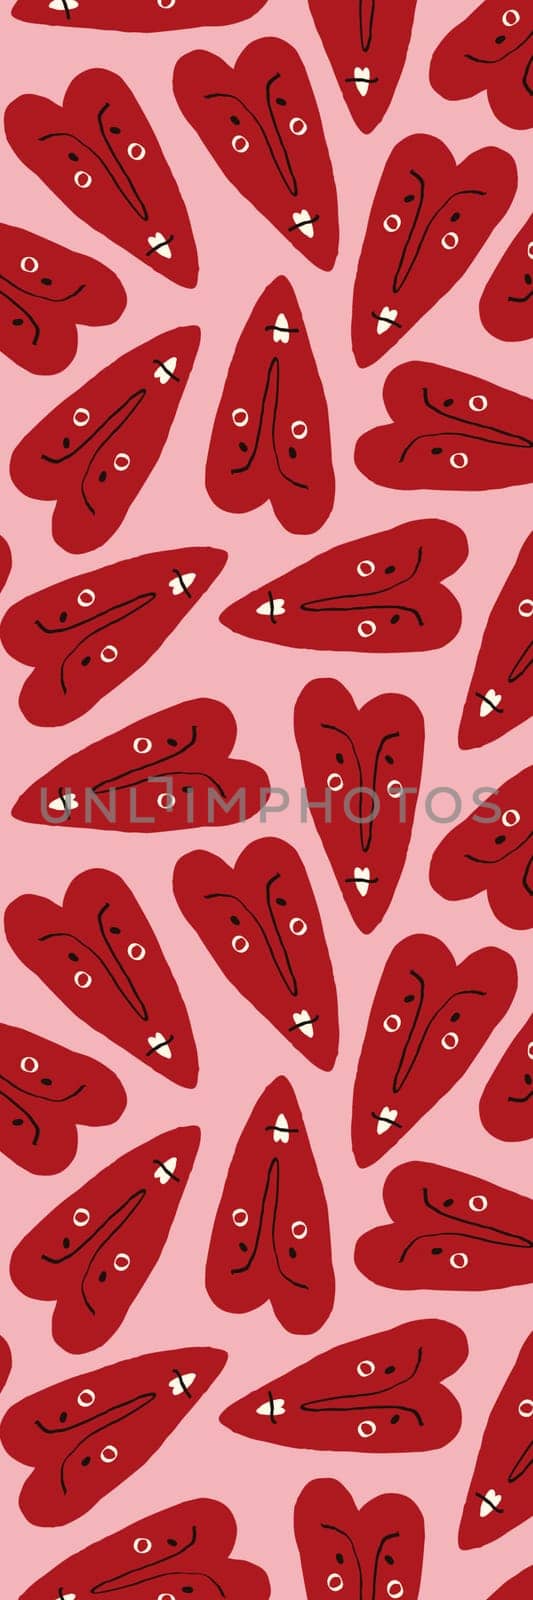 pink Retro groovy cartoon valentine's day bookmark with red hearts